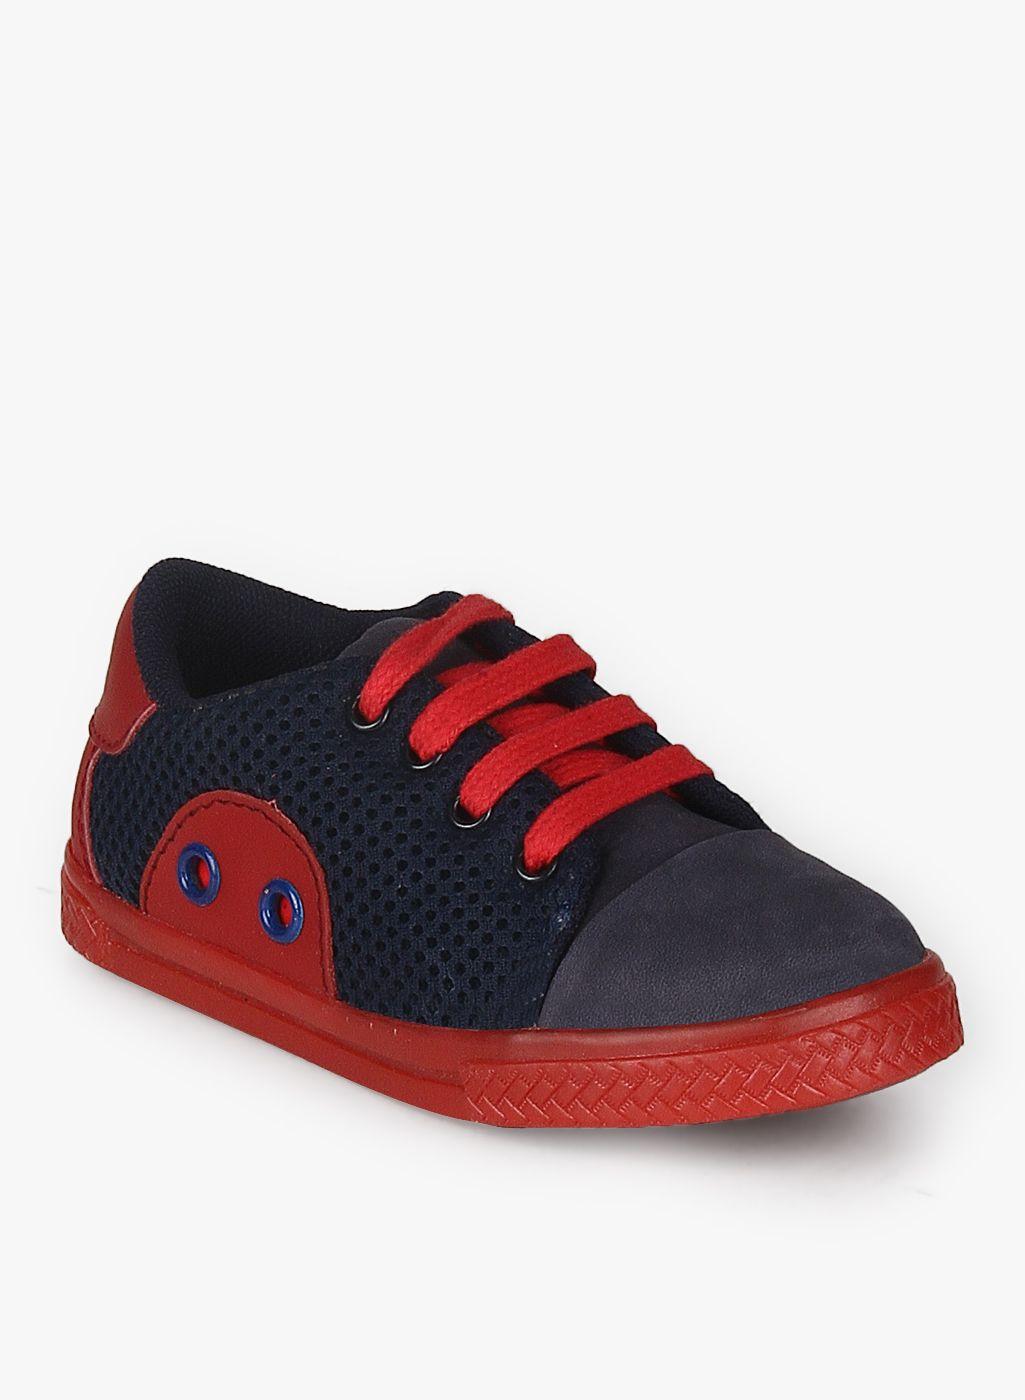 tuskey-boys-navy-blue-&-red-perforated-leather-sneakers